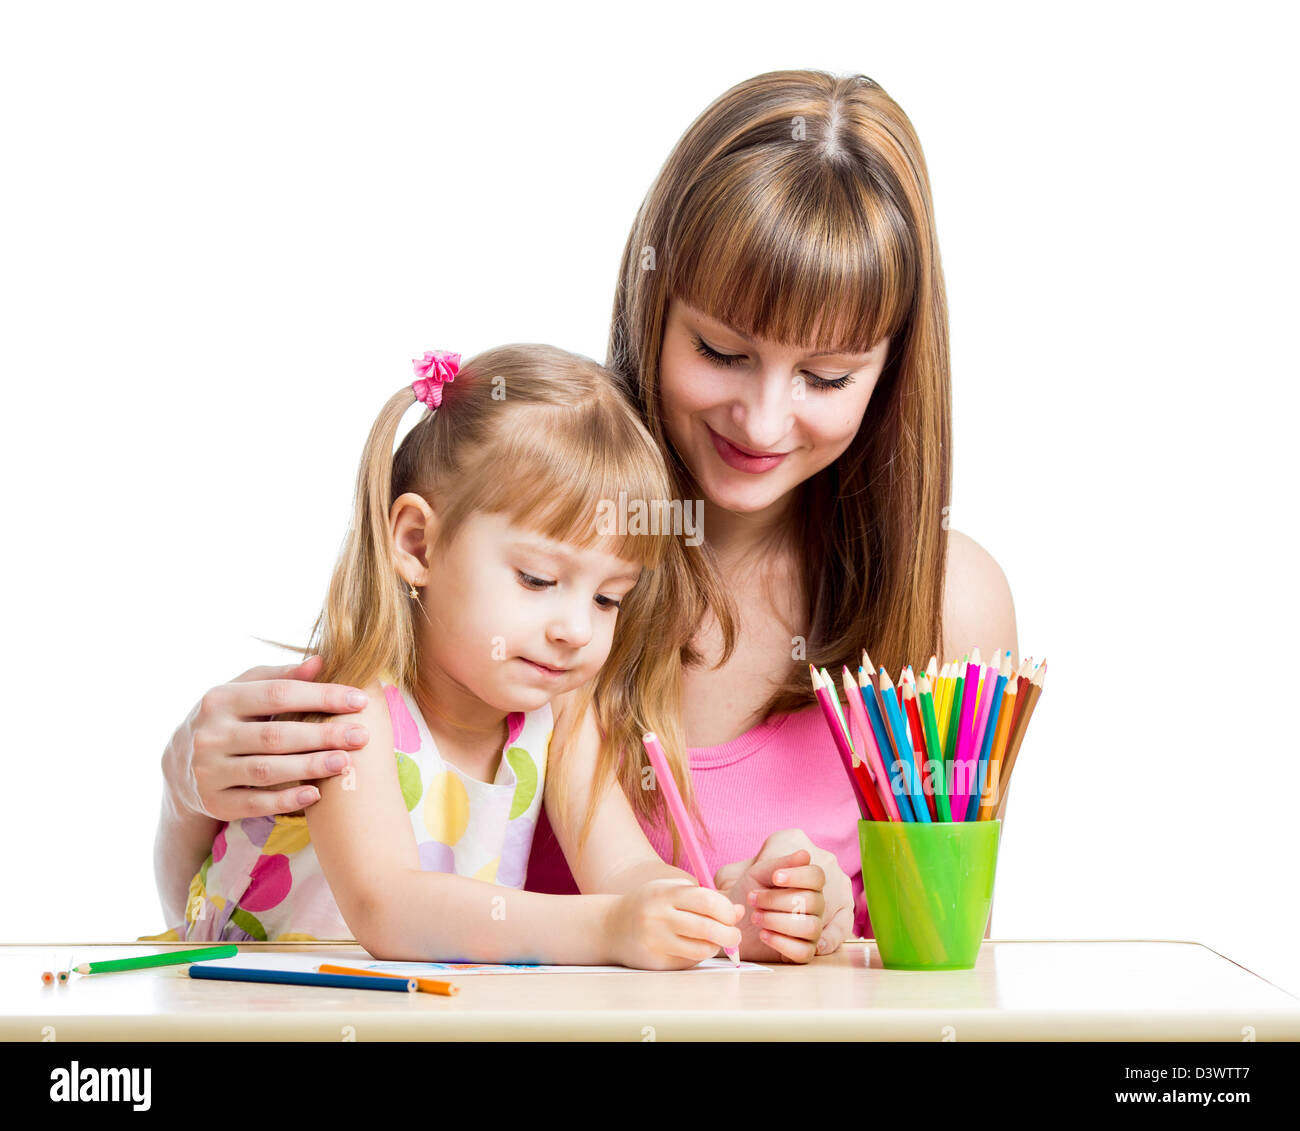 mother and her child girl pencil together Stock Photo